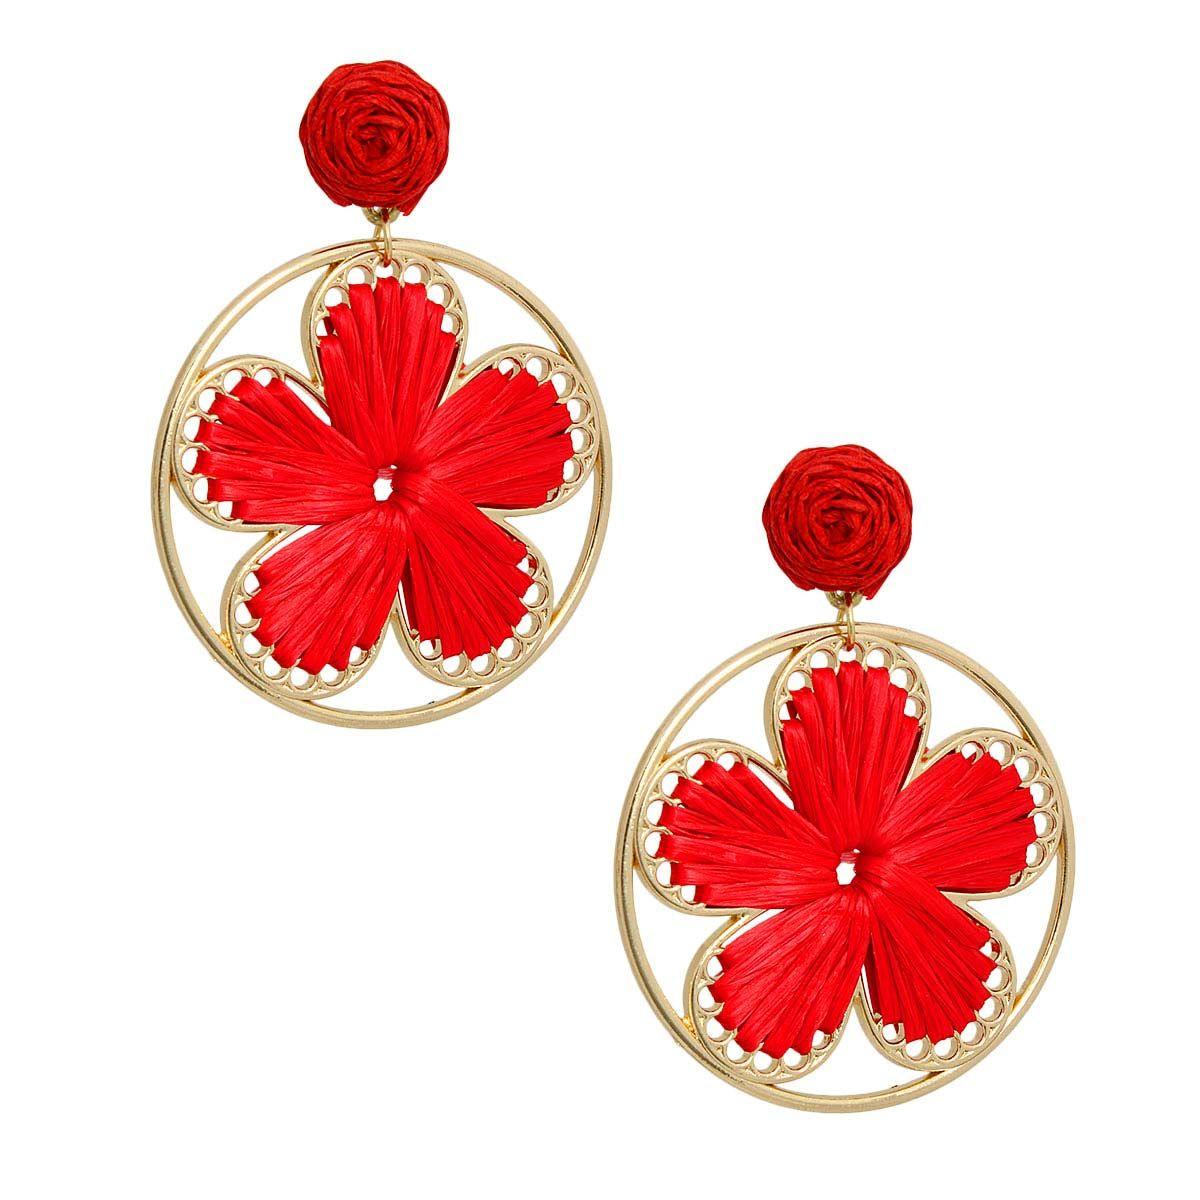 Red Raffia Flower Earrings: Shop Now for Unique Jewelry